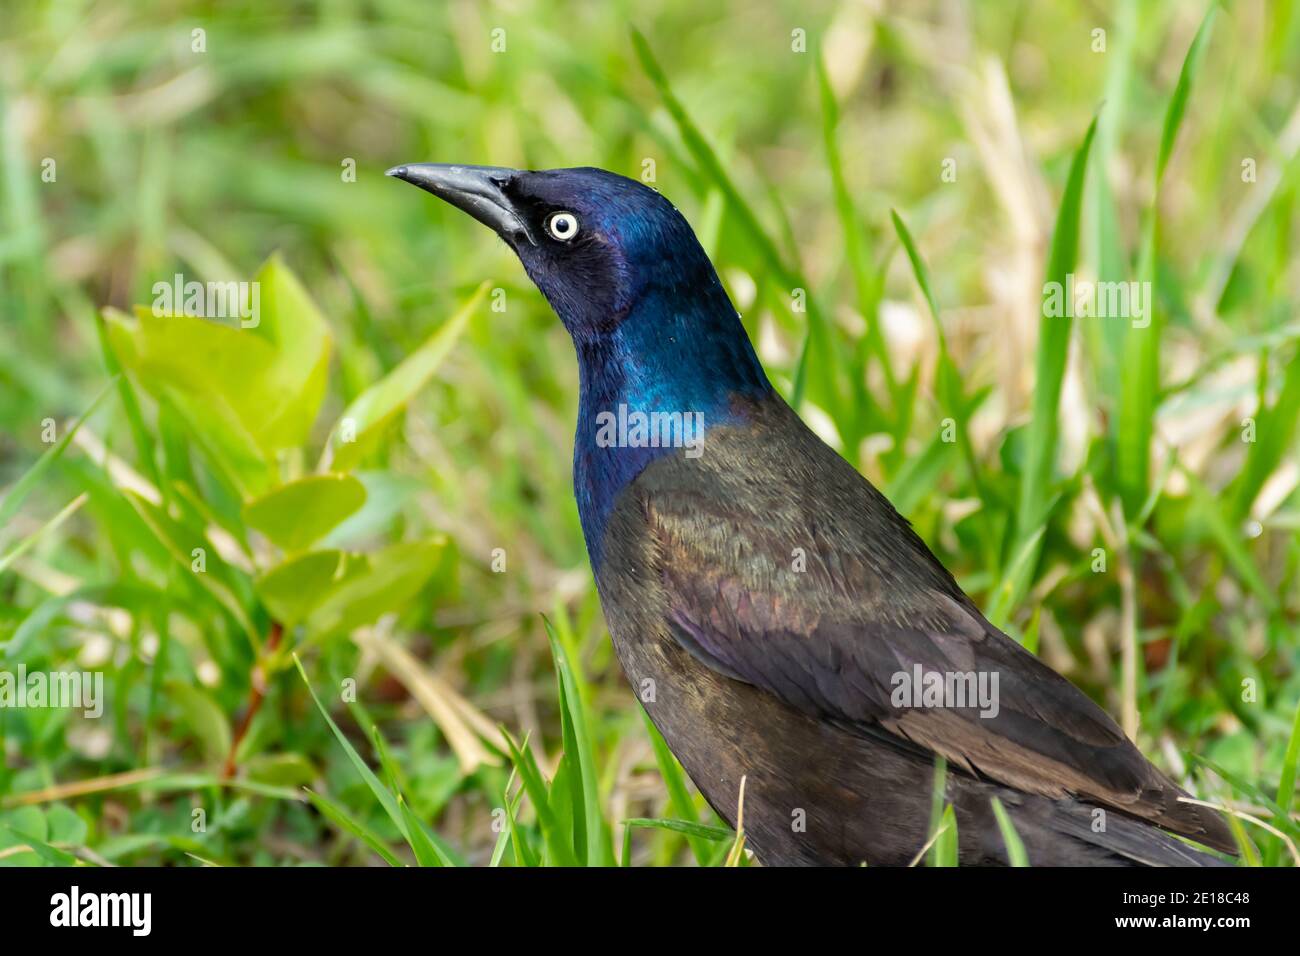 Closeup of the iridescent blue head of a common grackle, Quiscalus quiscula, in the Lois Hole Provincial Park, Alberta, Canada Stock Photo